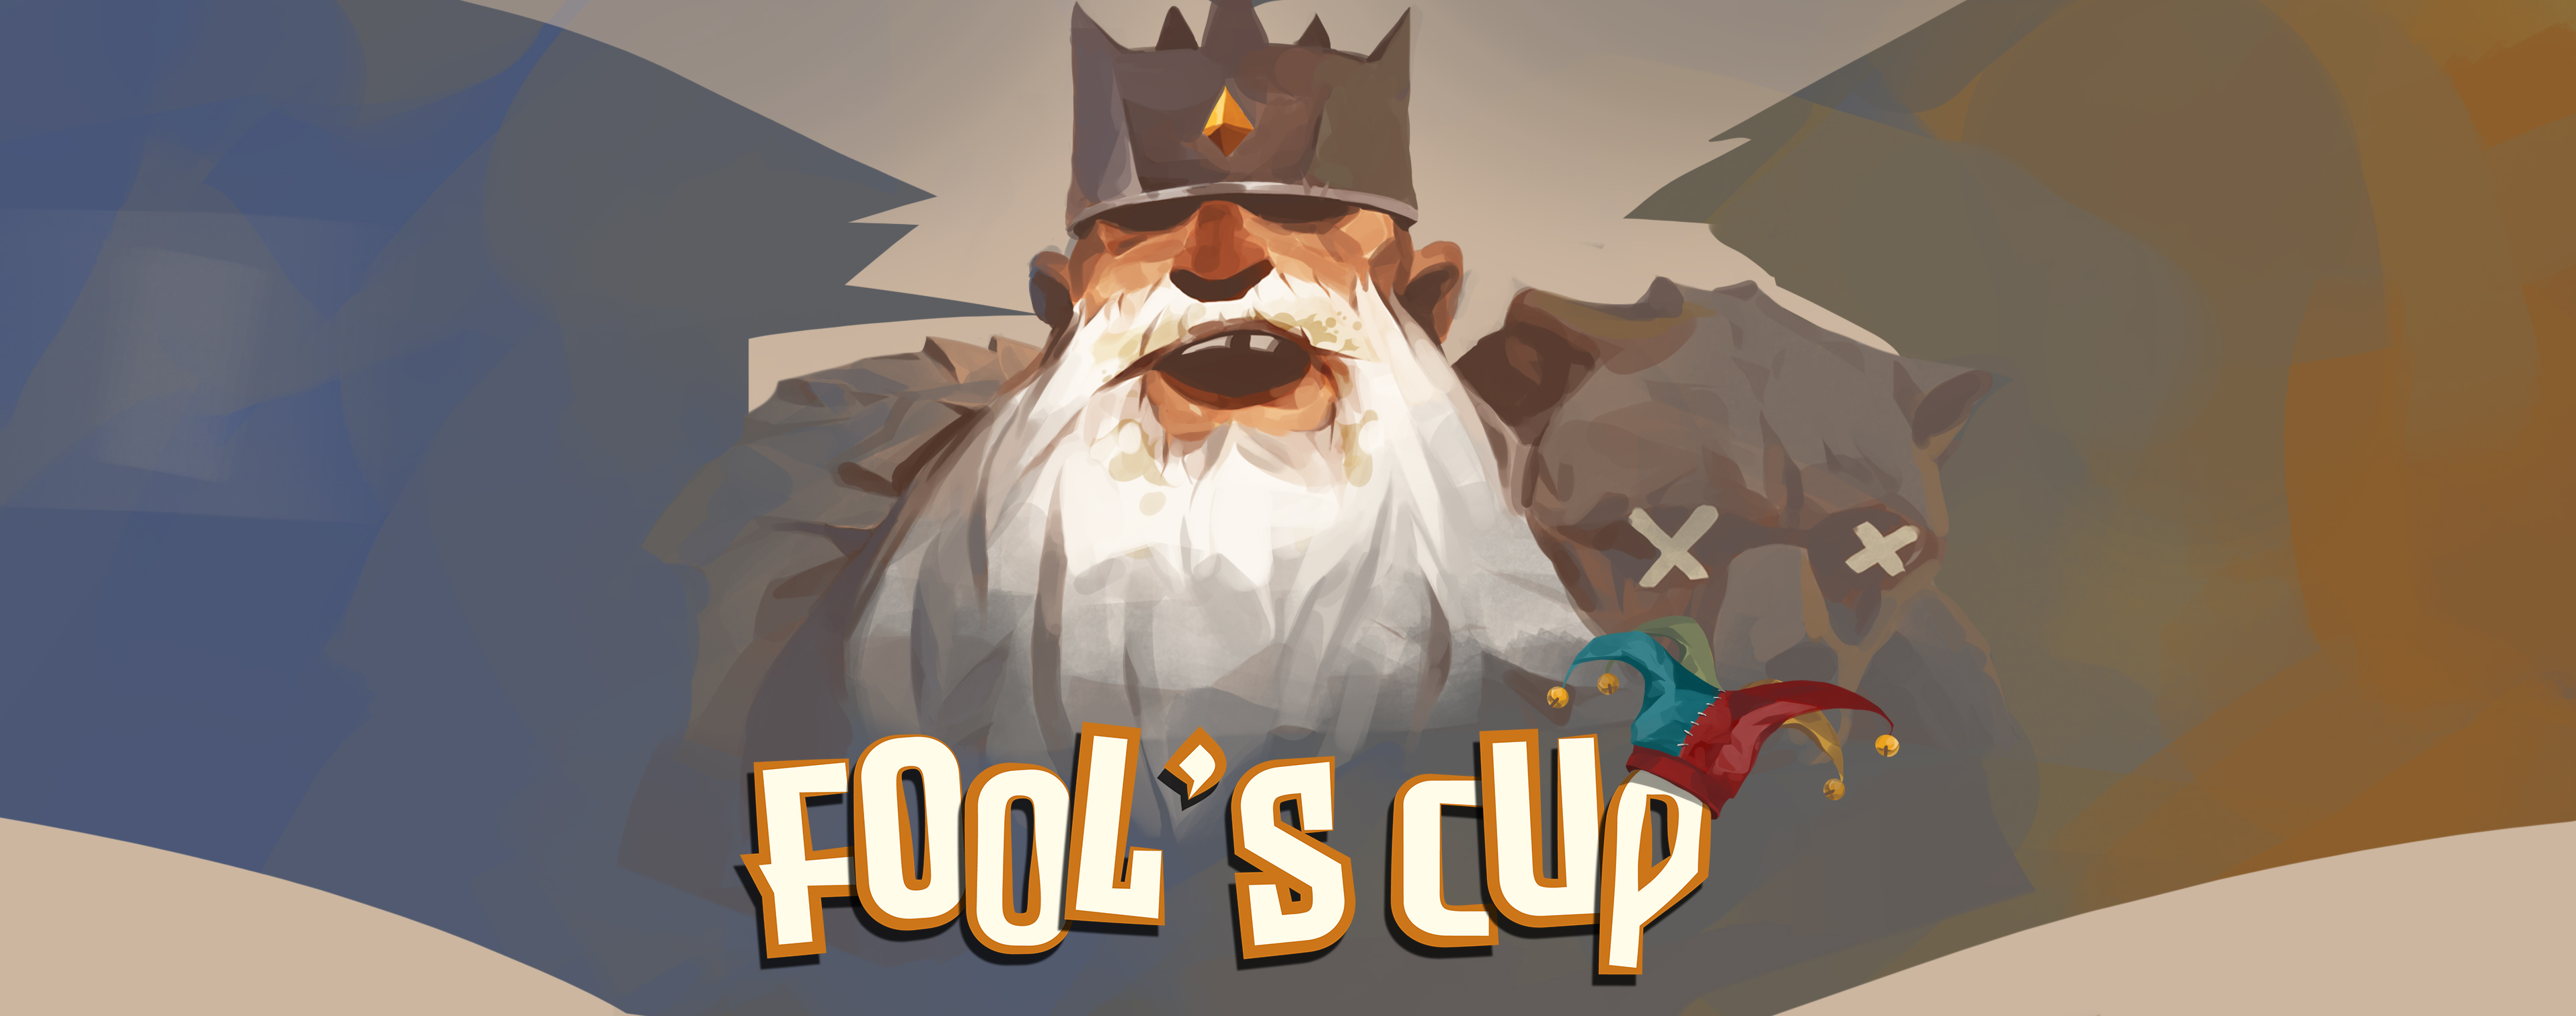 Fool's Cup